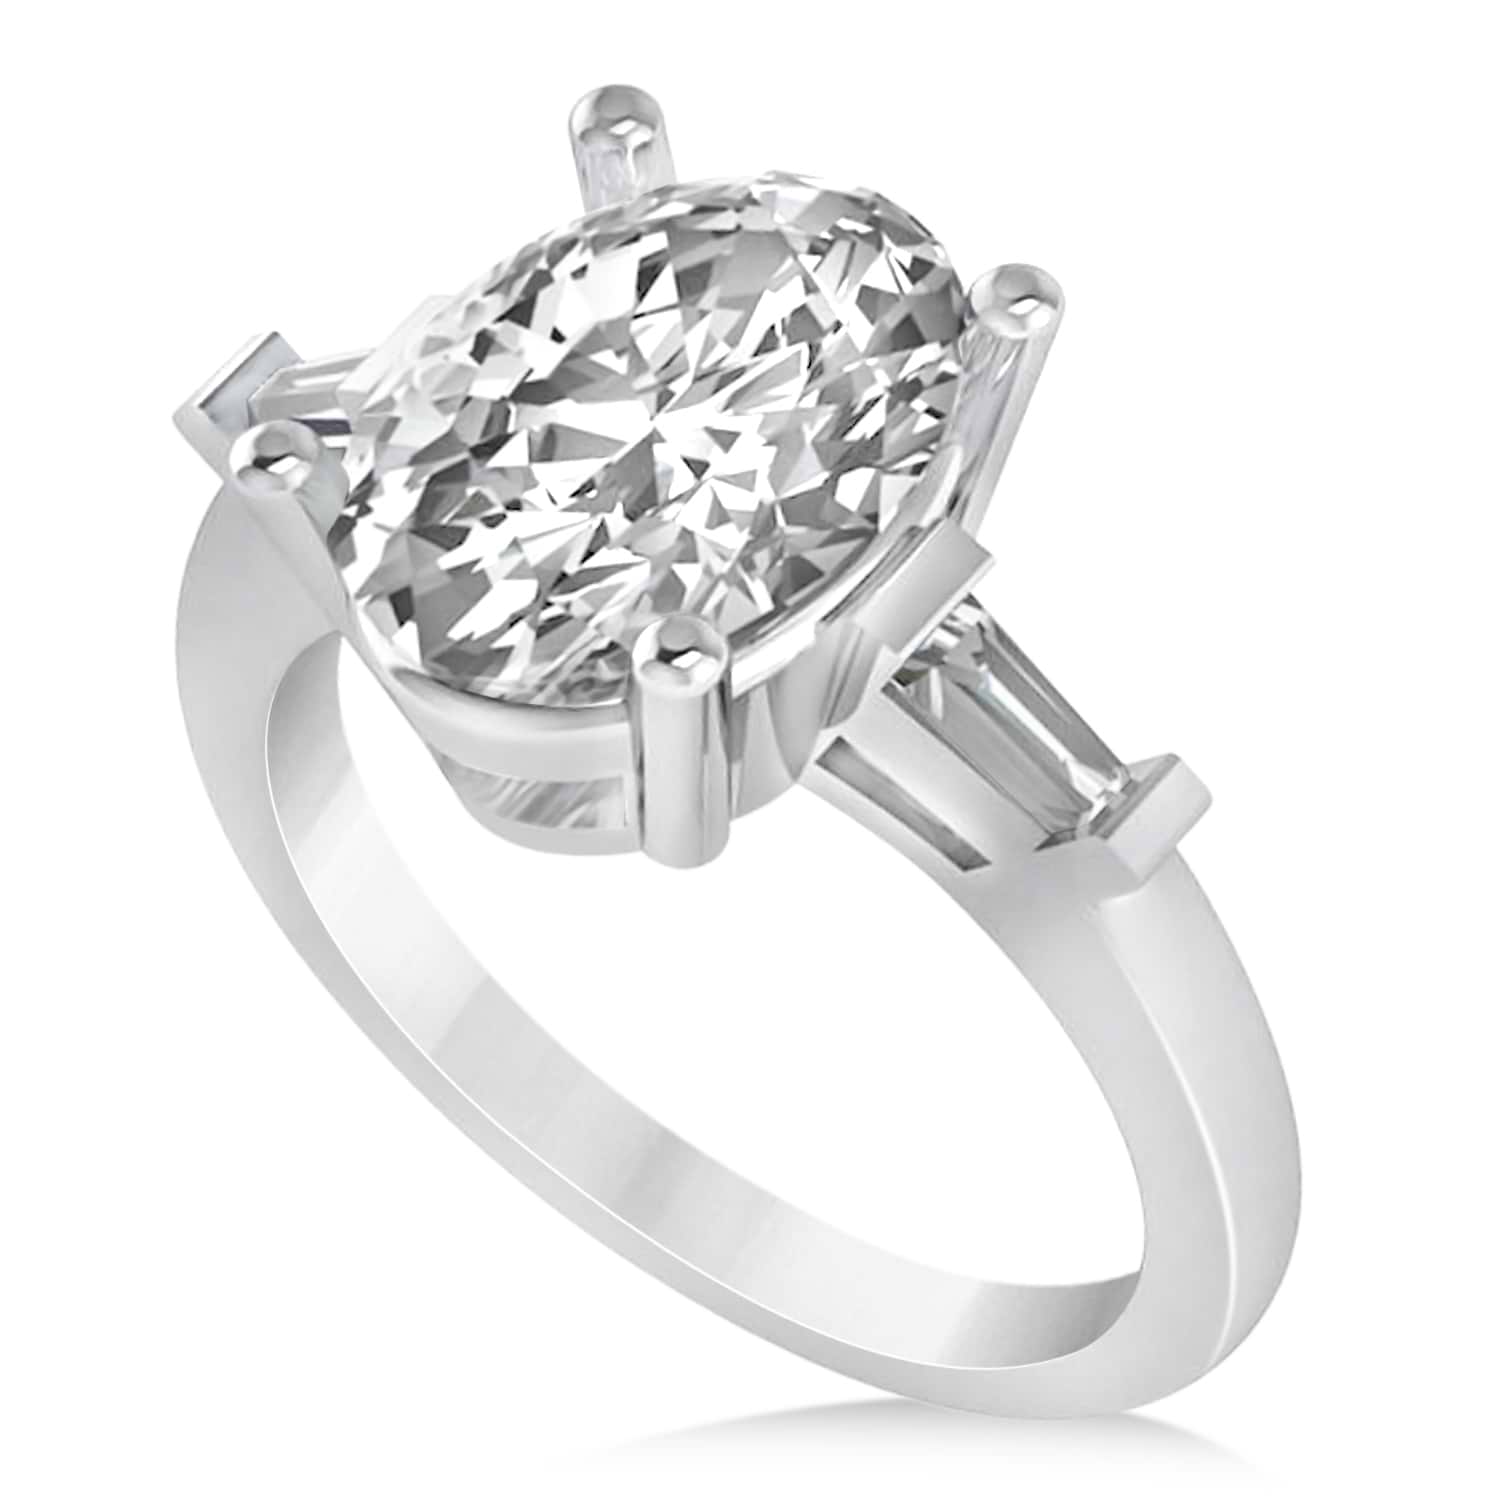 Oval & Baguette Cut Diamond Engagement Ring 14k White Gold (3.30ct)